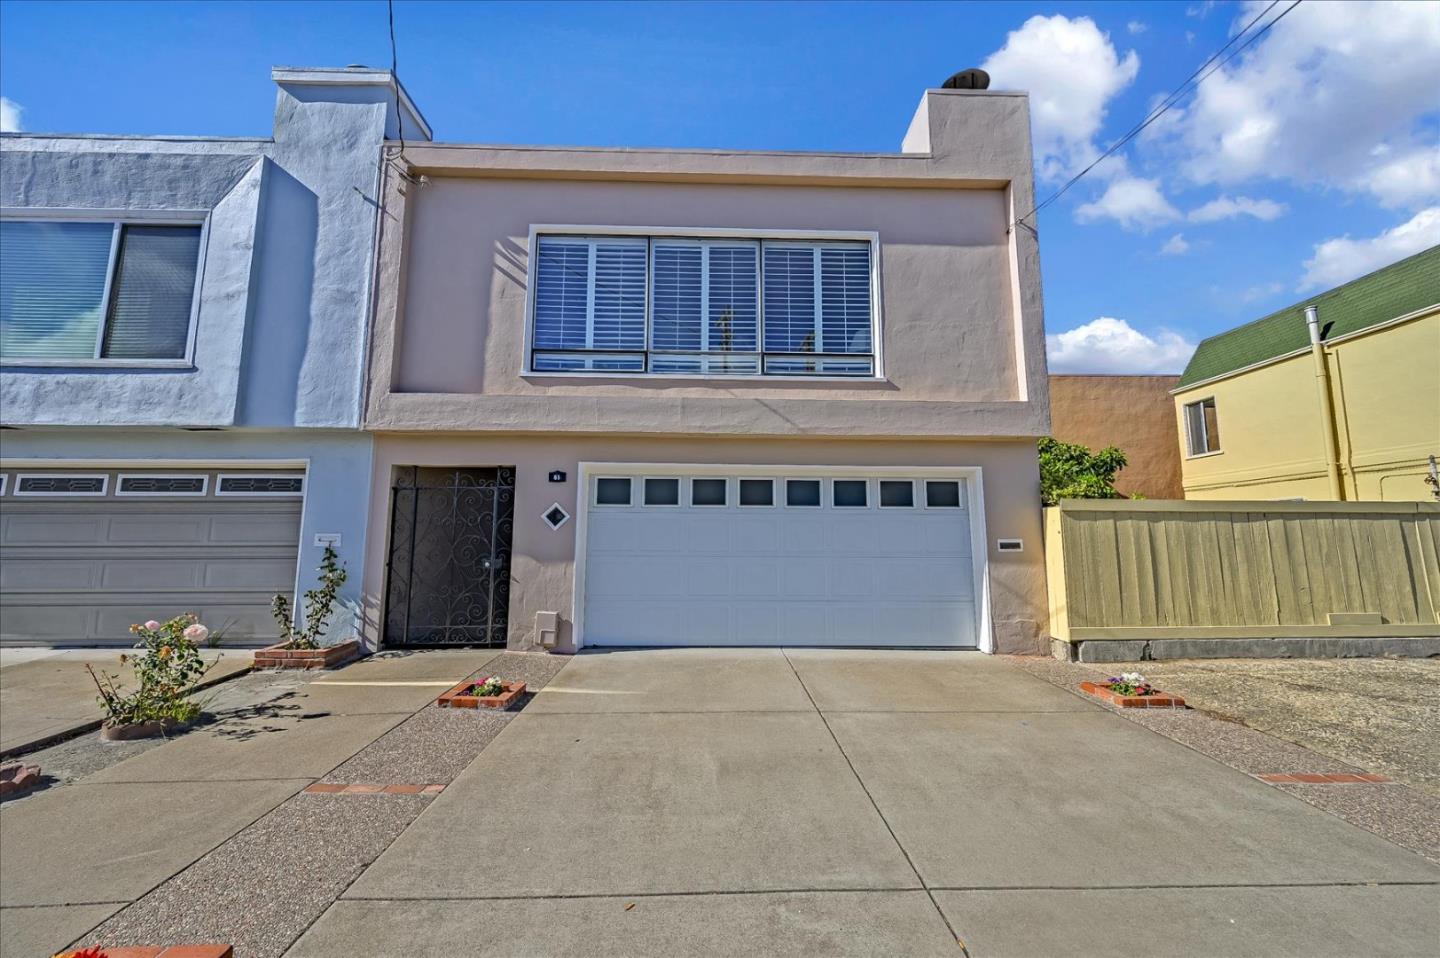 61 Valley ST, DALY CITY, CA 94014